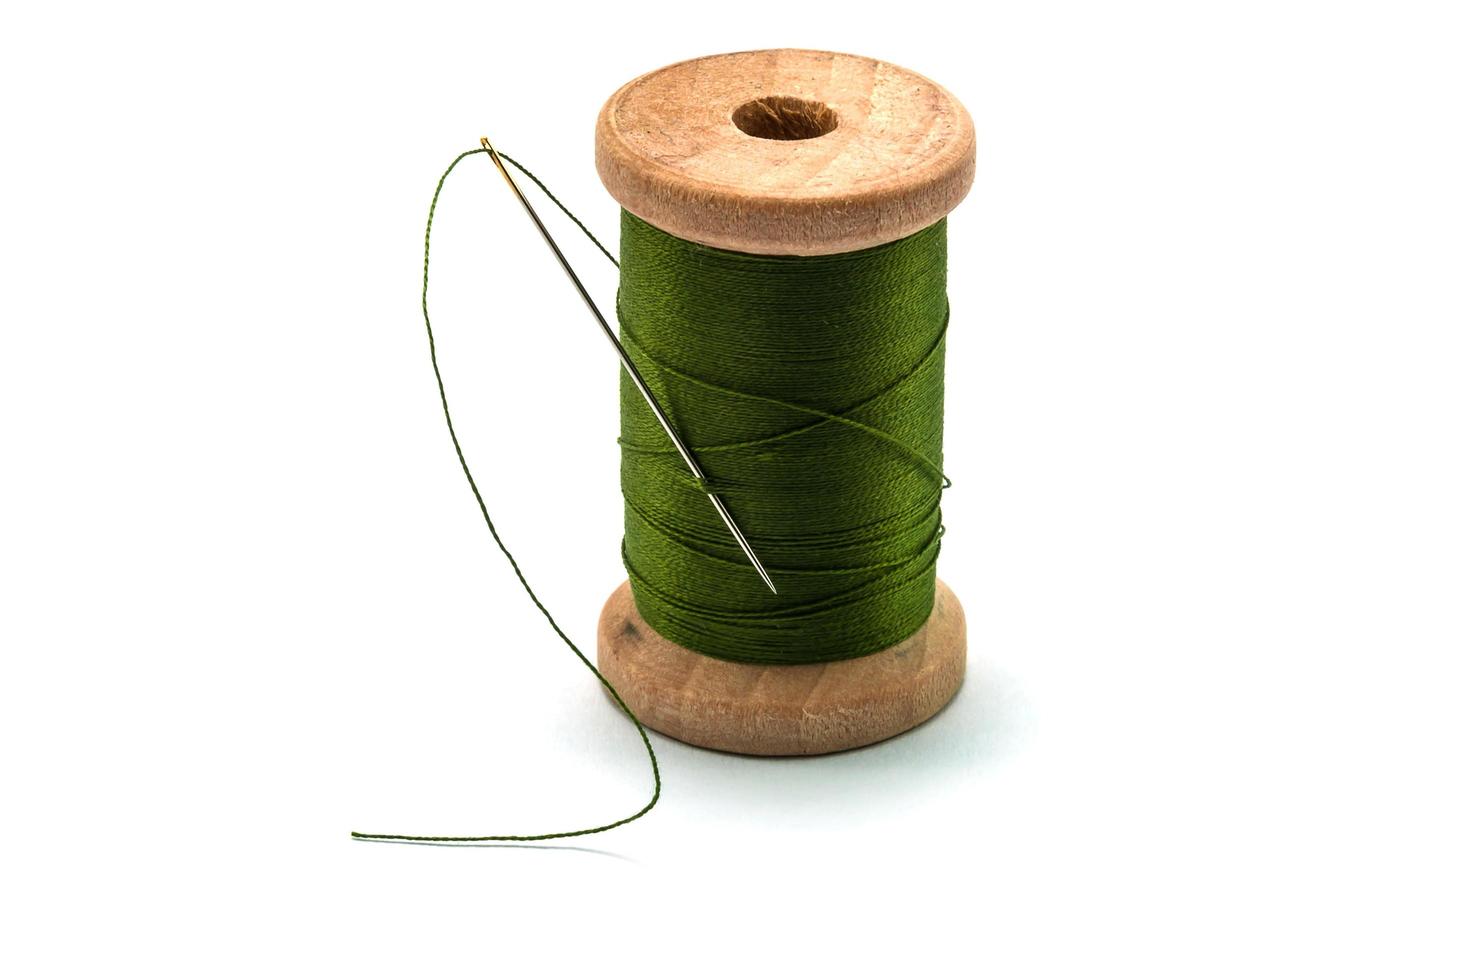 Isolated wooden spool of green thread with a needle photo